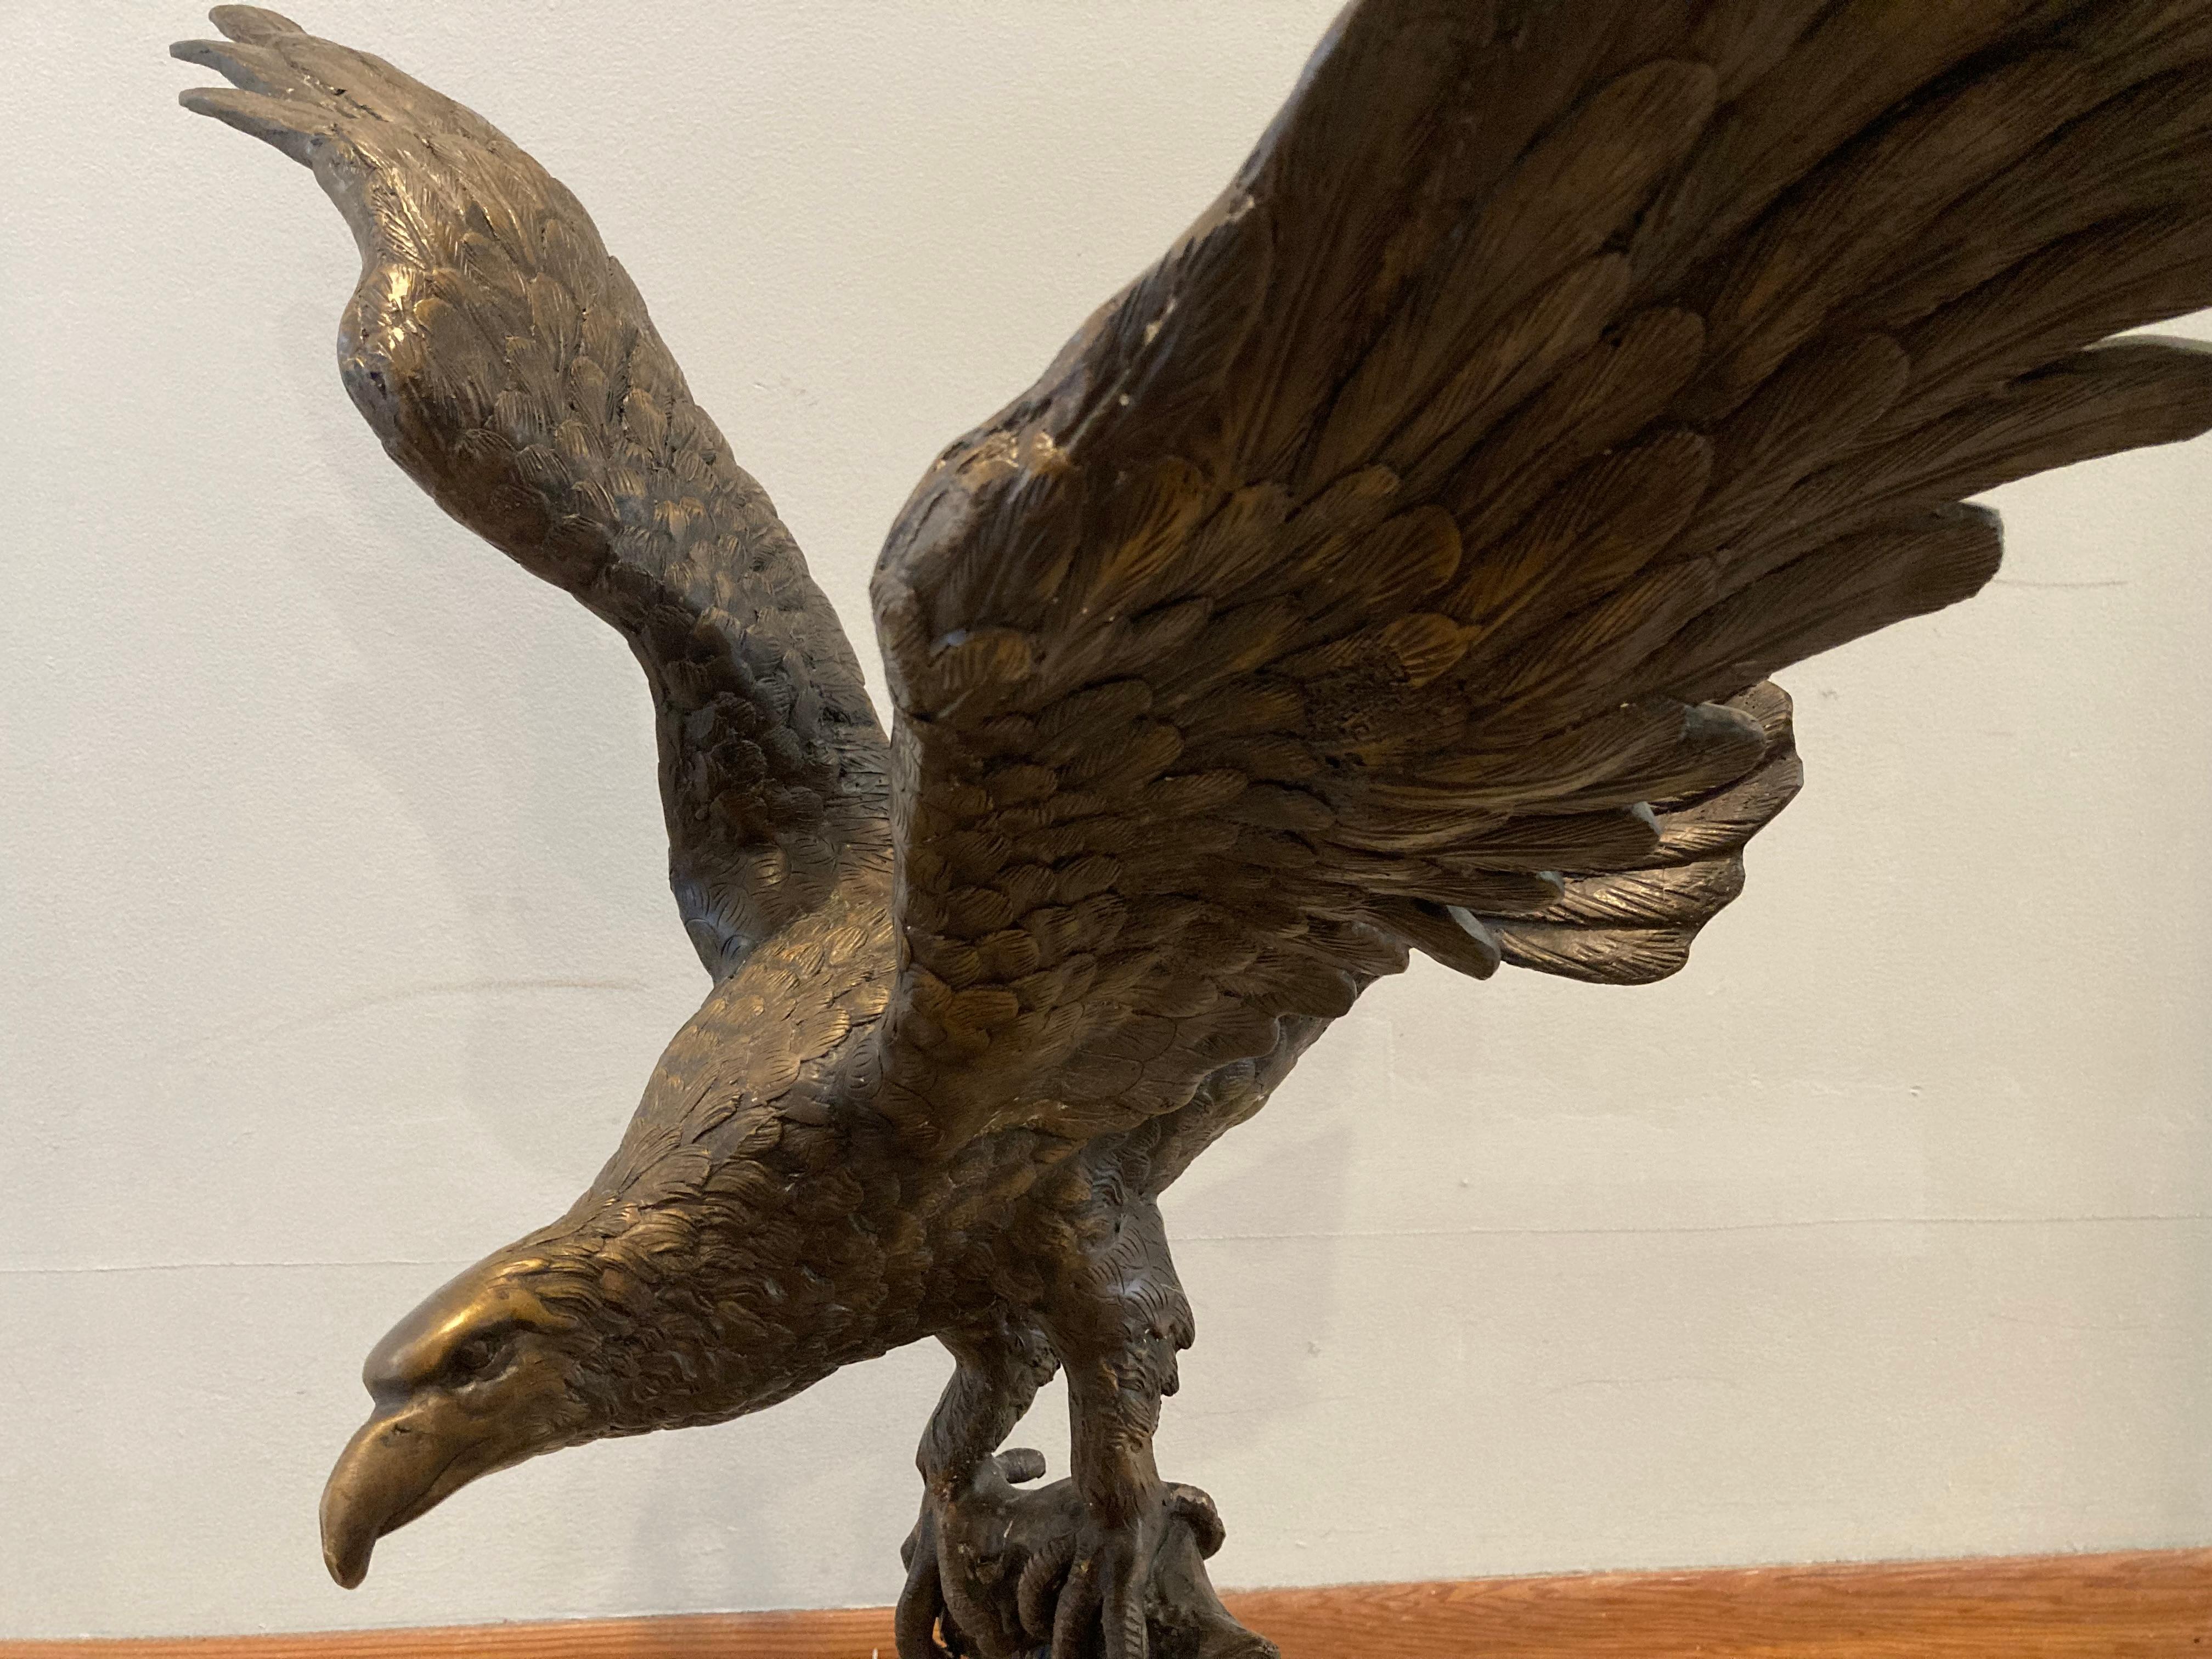 A large, powerfully affecting sculpture of an eagle perched and preparing to take off. I have included a photo of a soda can in one shot to give you an idea of the scale of this sculpture; casting anything this size costs a fortune these days. But